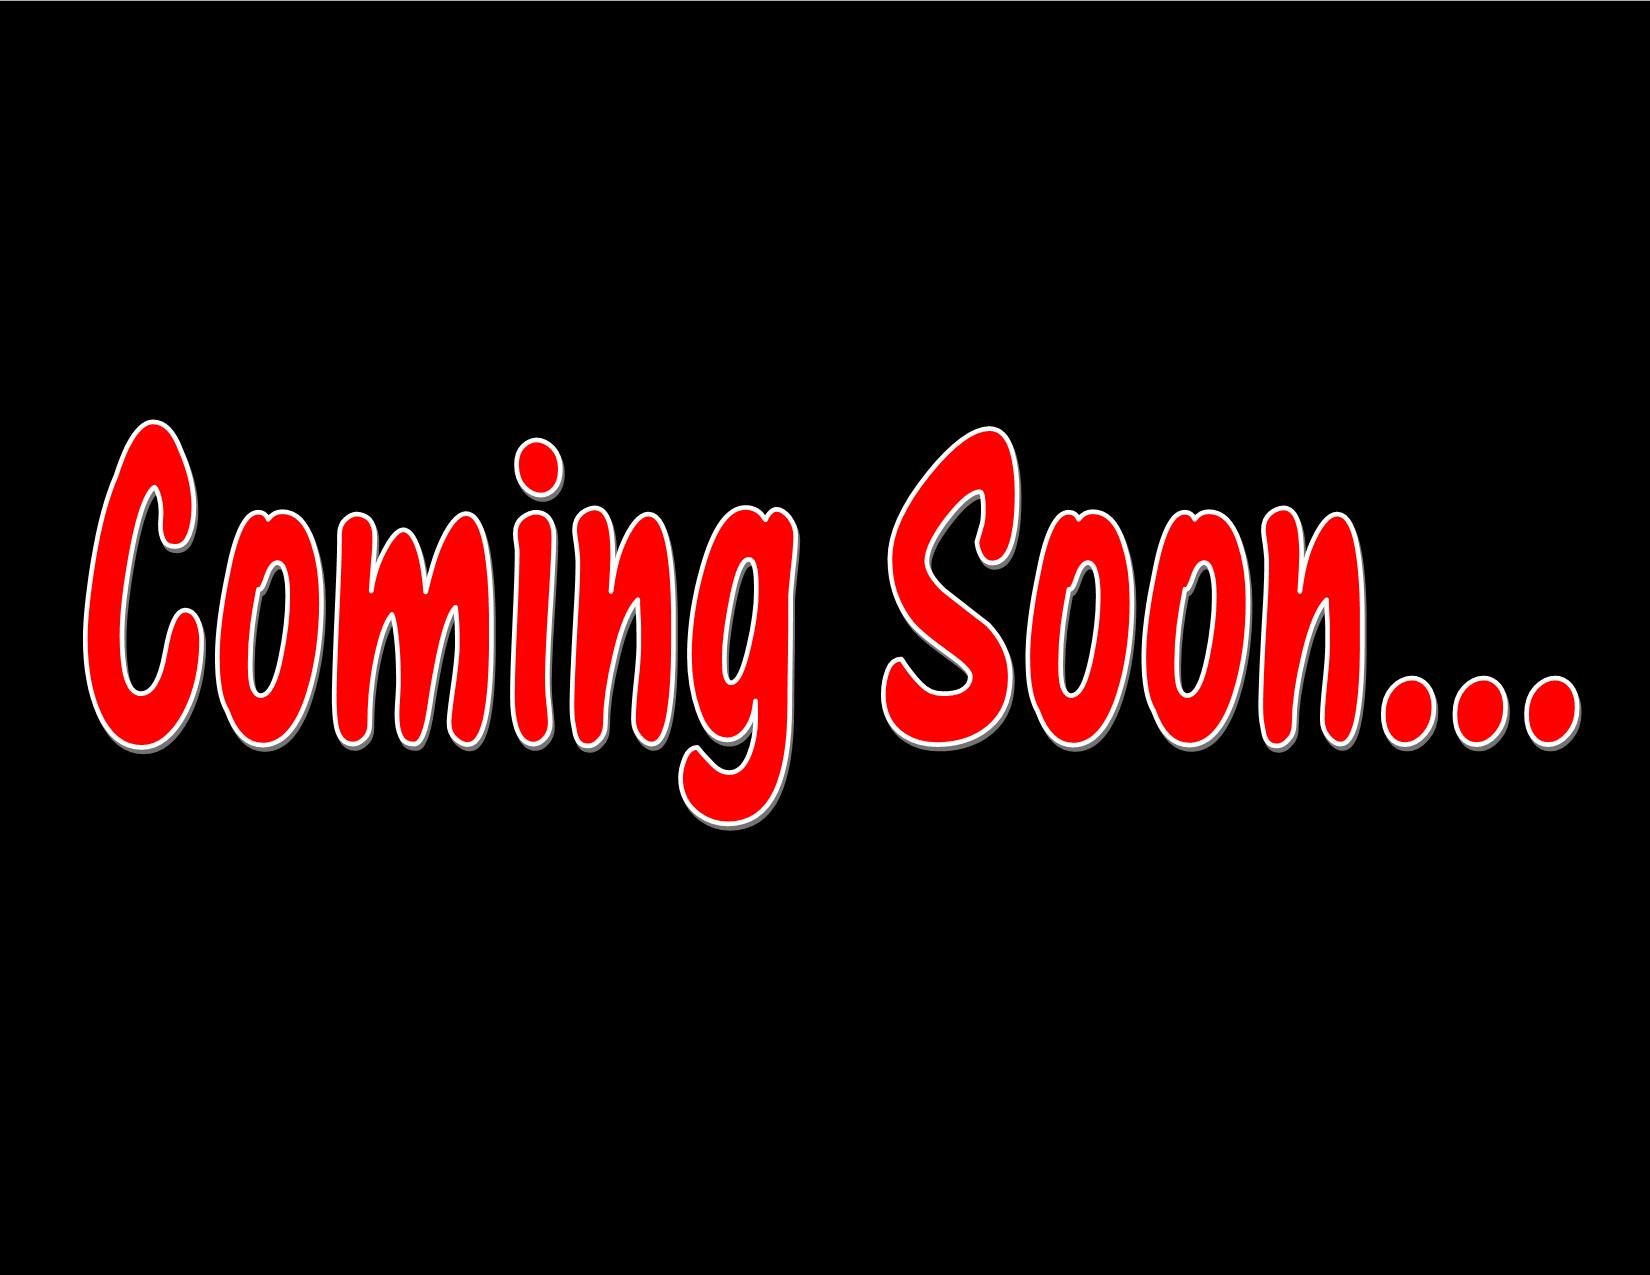 Coming Soon Sign Text Coming Soon Wallpapers Hd Desktop And